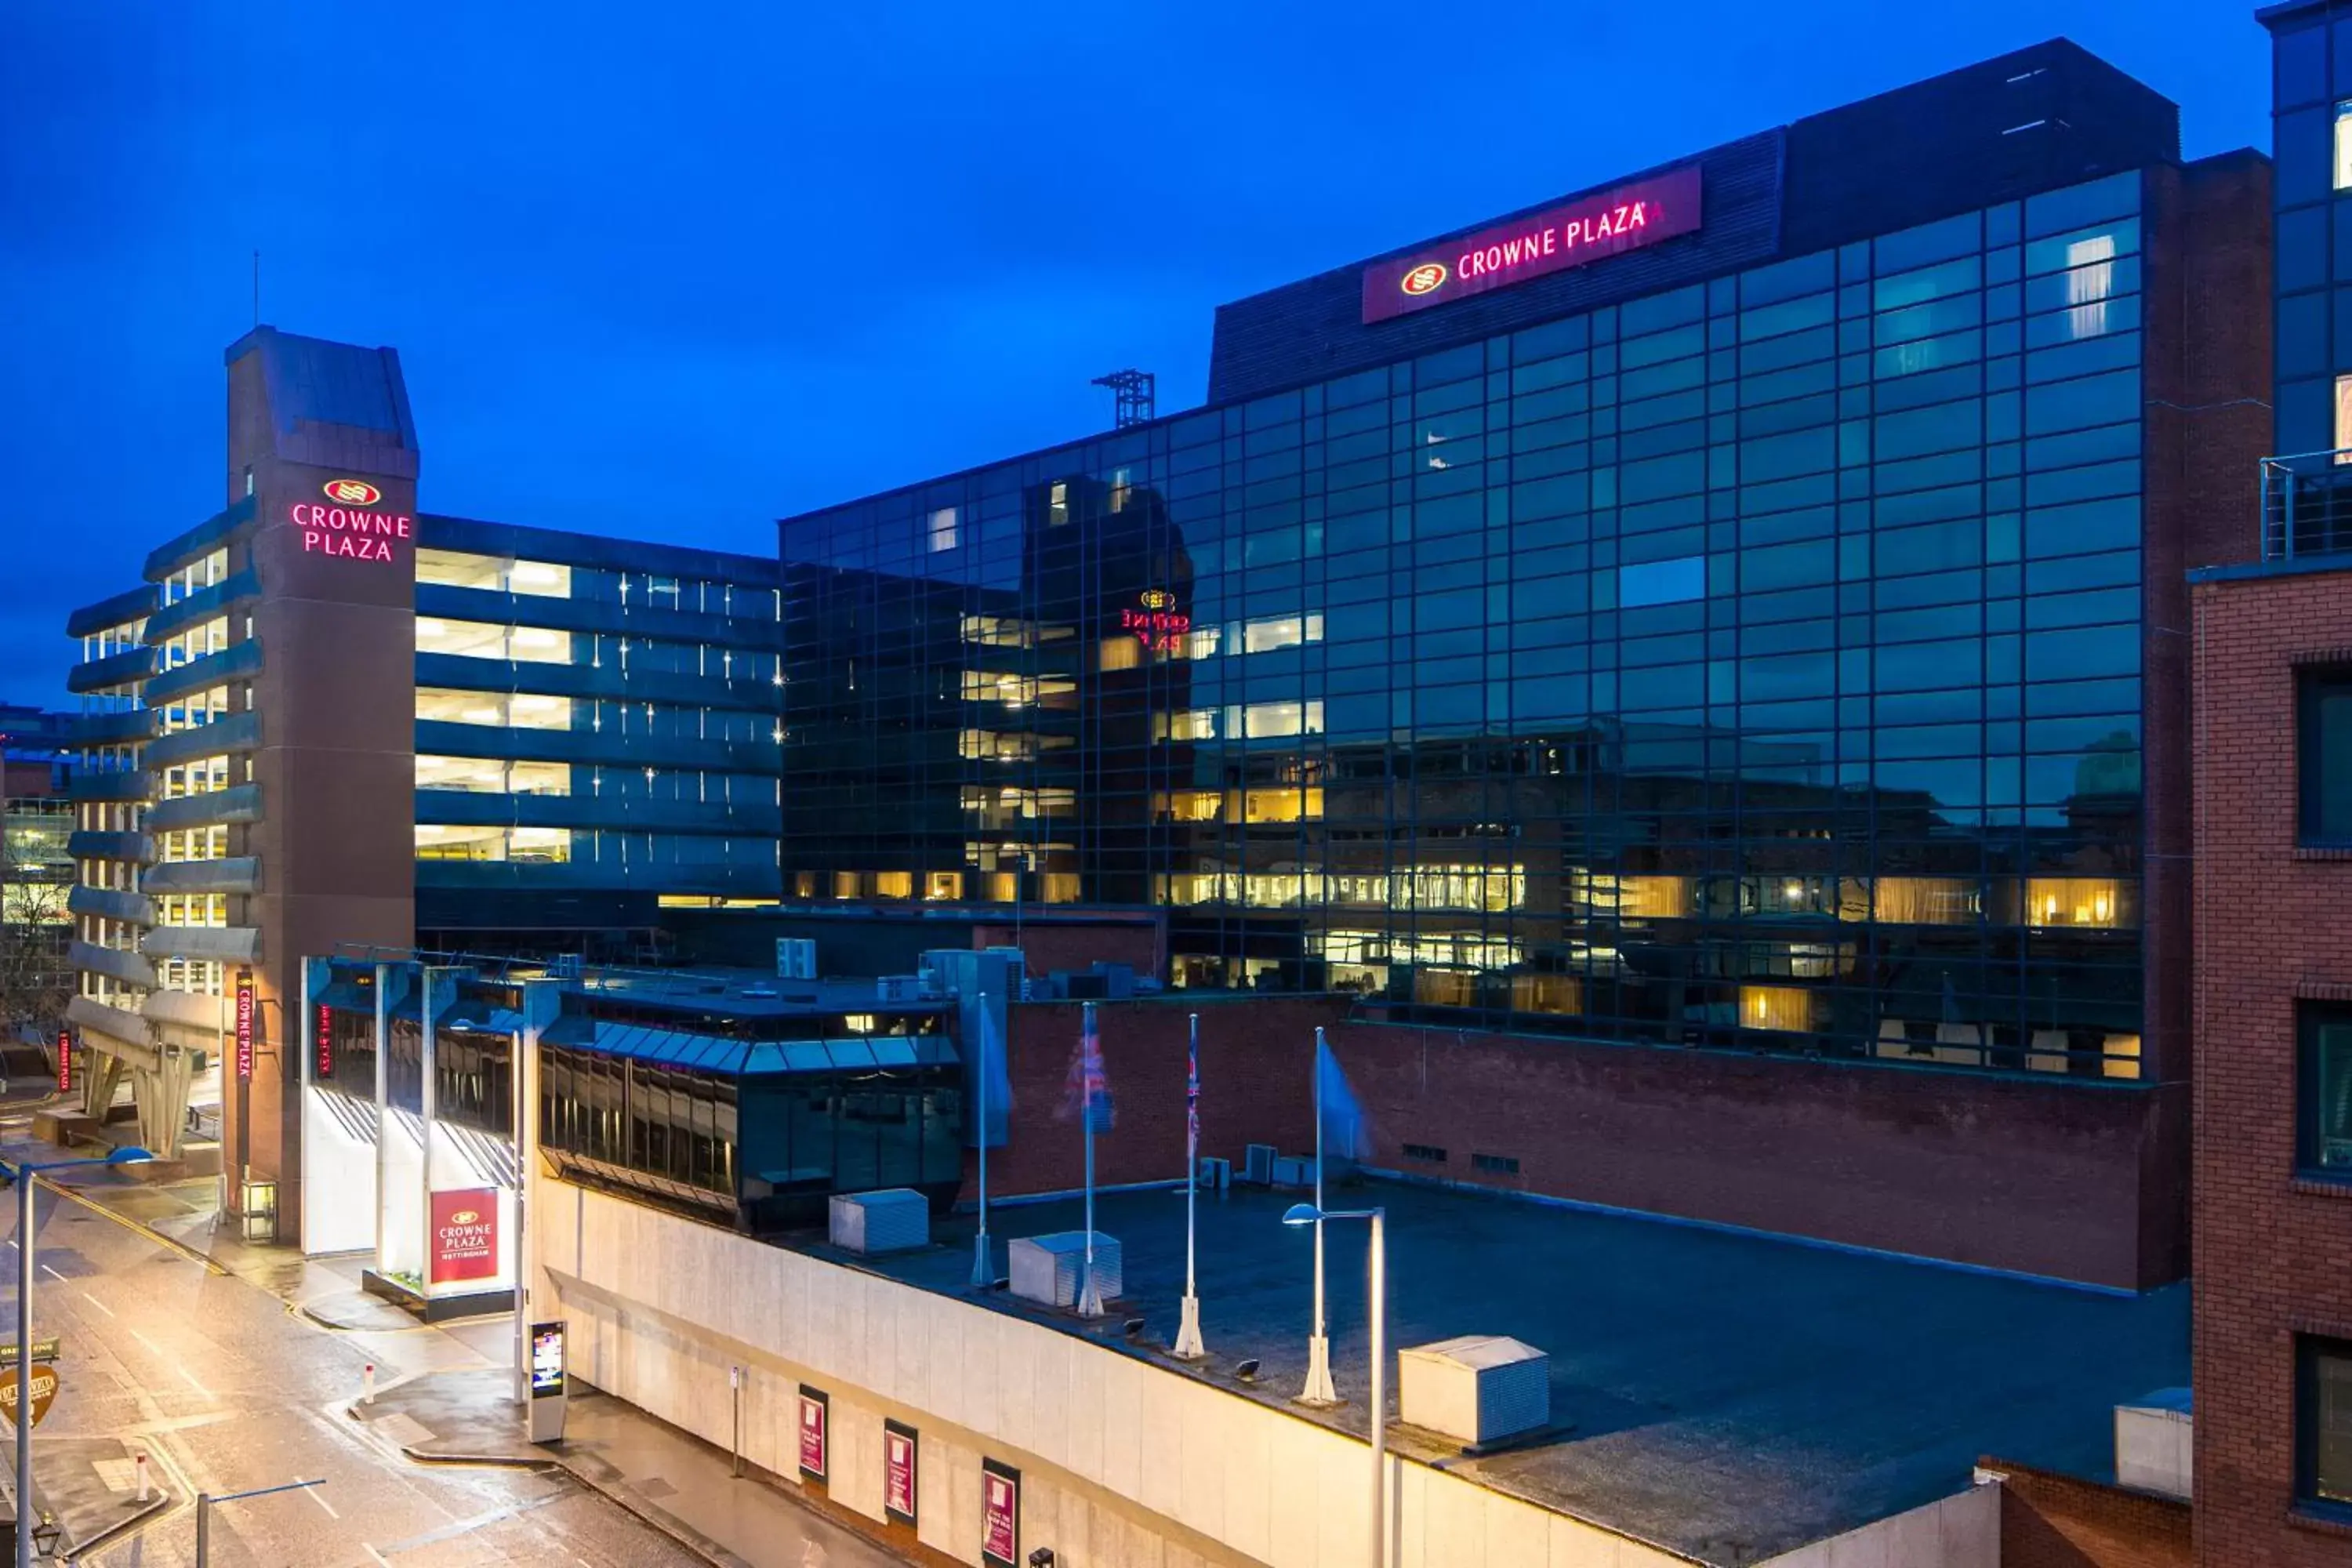 Property building in Crowne Plaza Nottingham, an IHG Hotel